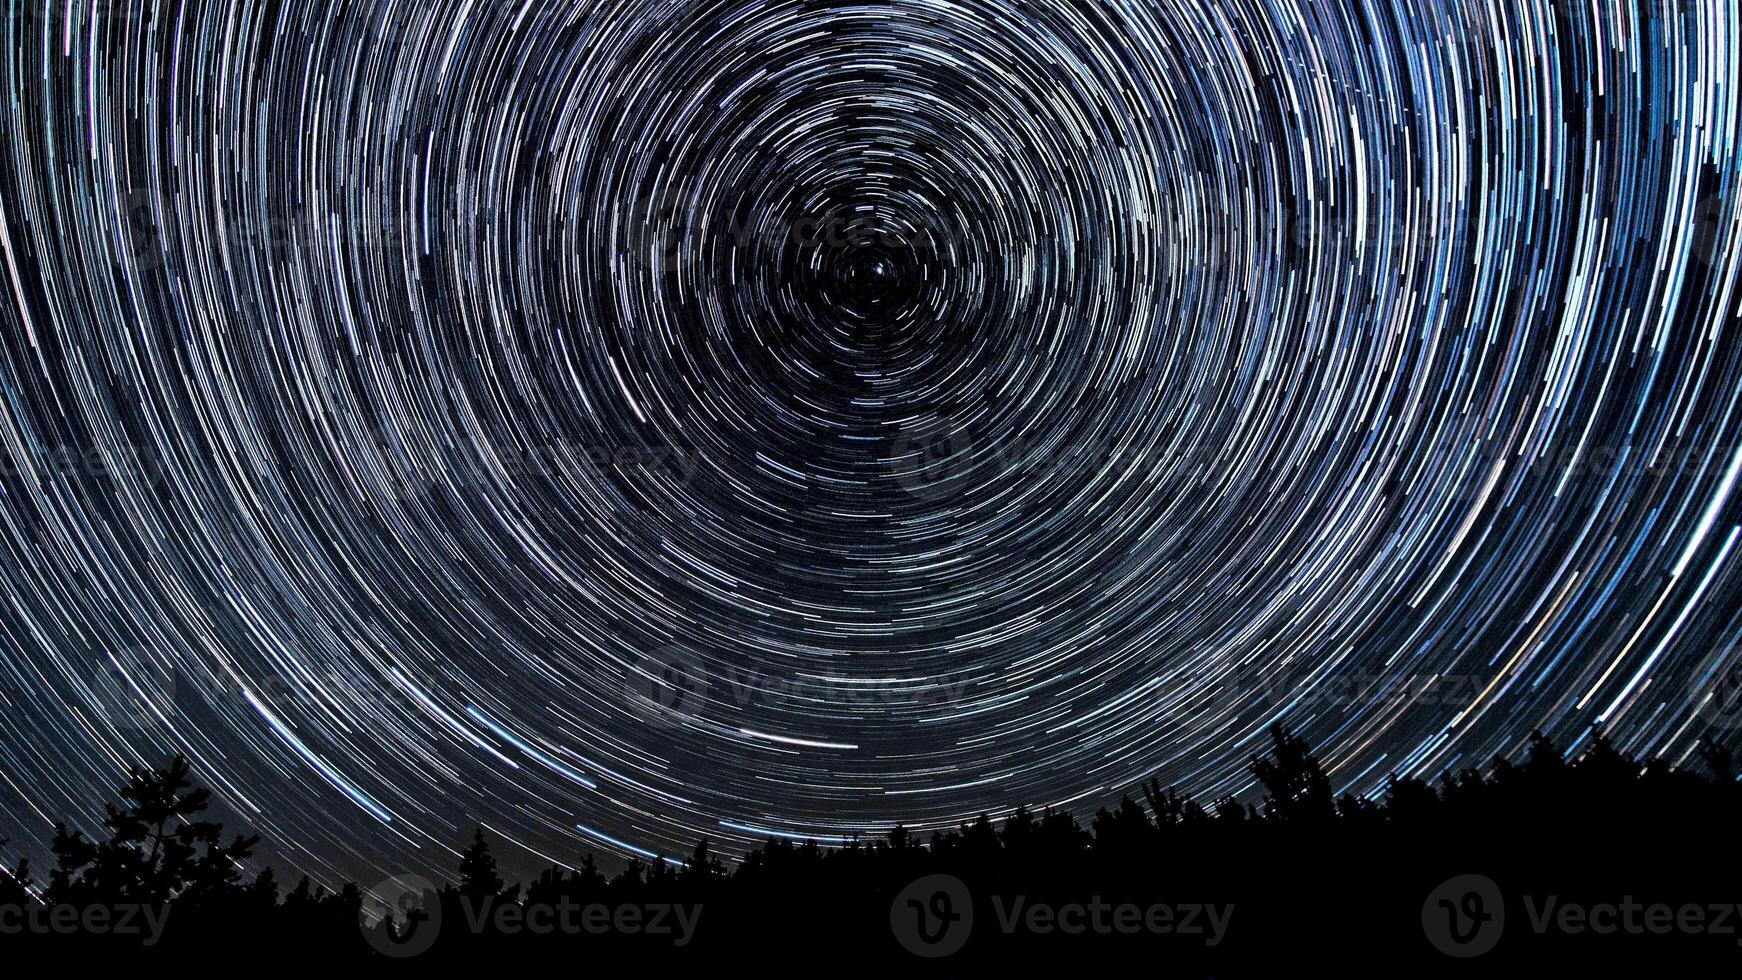 Star trails in the night sky. Stars move around a polar star. Silhouettes of trees photo